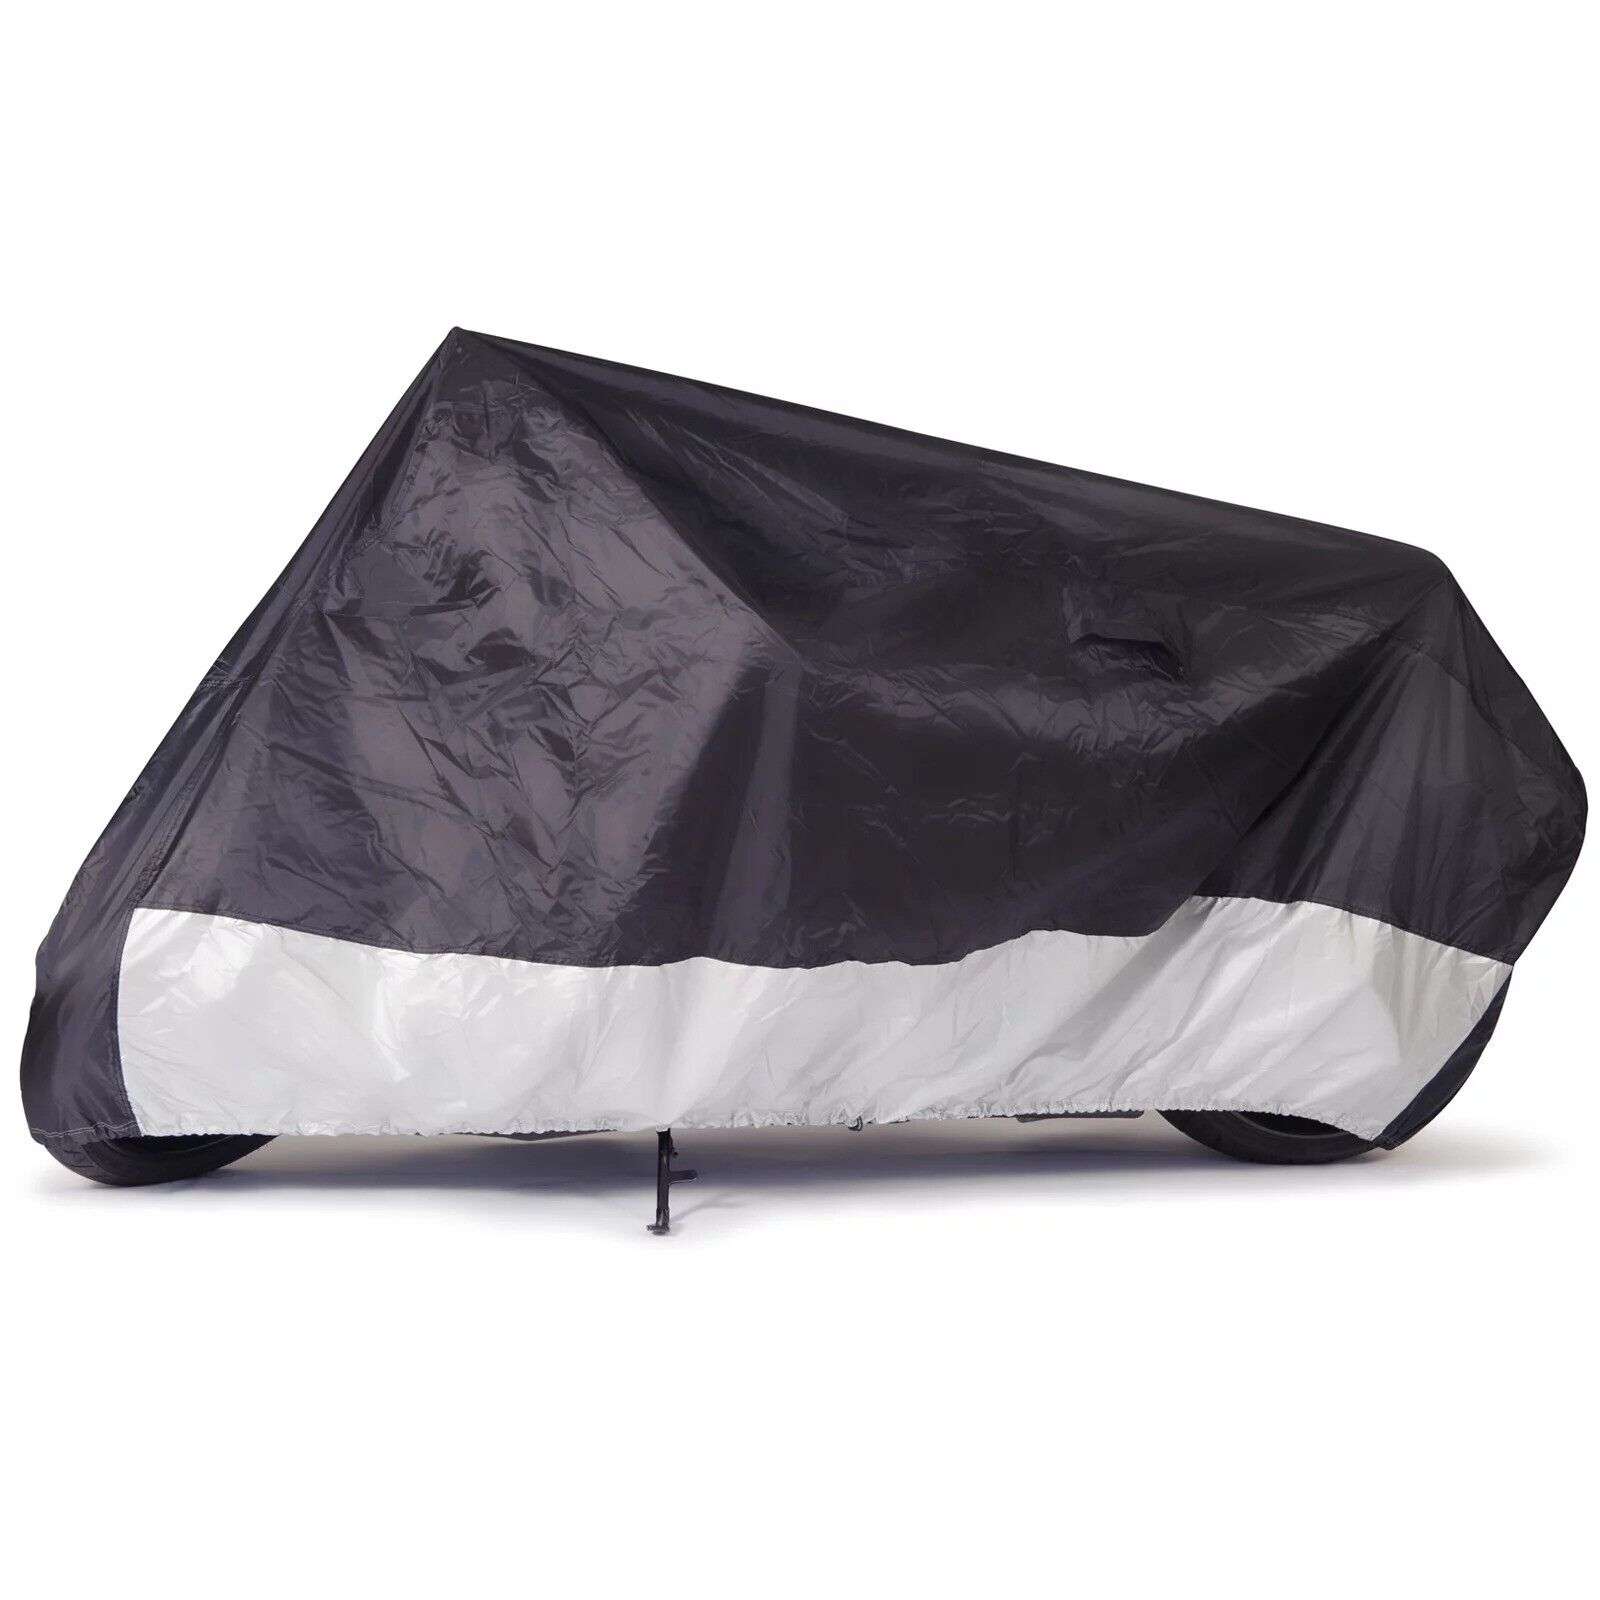 Budget waterproof motorcycle cover with moderate rain and dust resistance